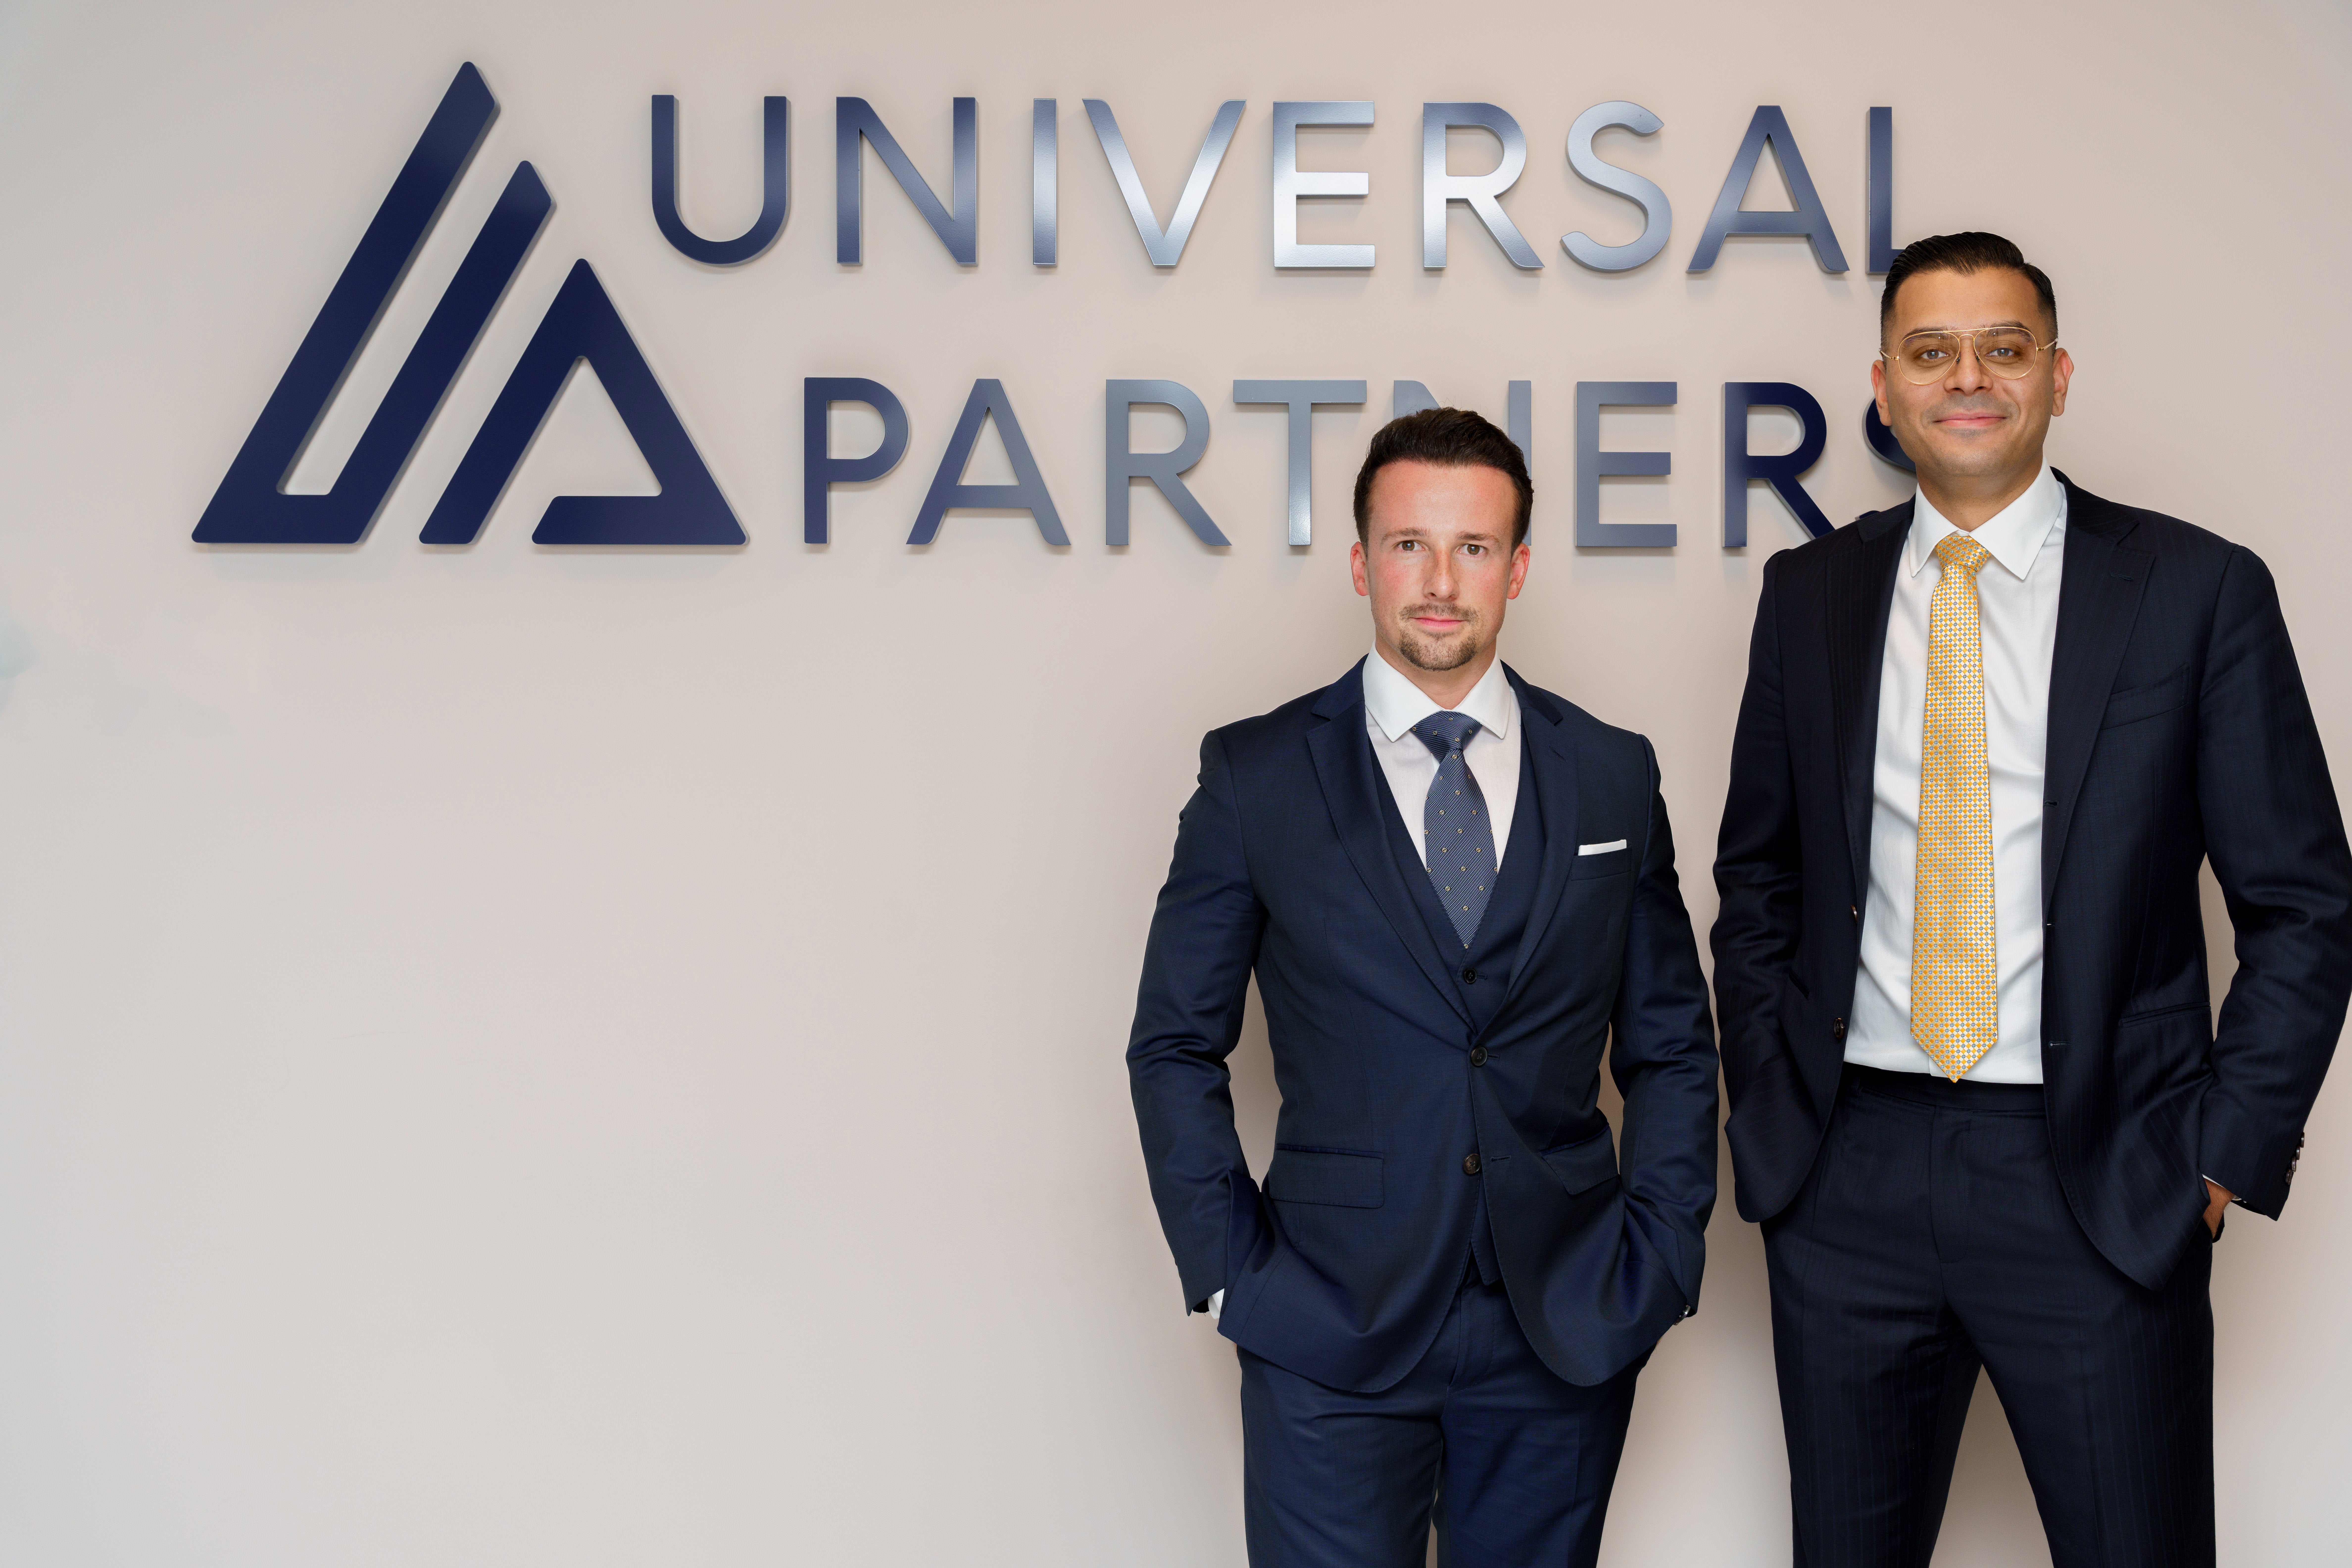 Oliver Carson (CEO) and Dhaval Patel (Chairman) co-founded the company in 2017